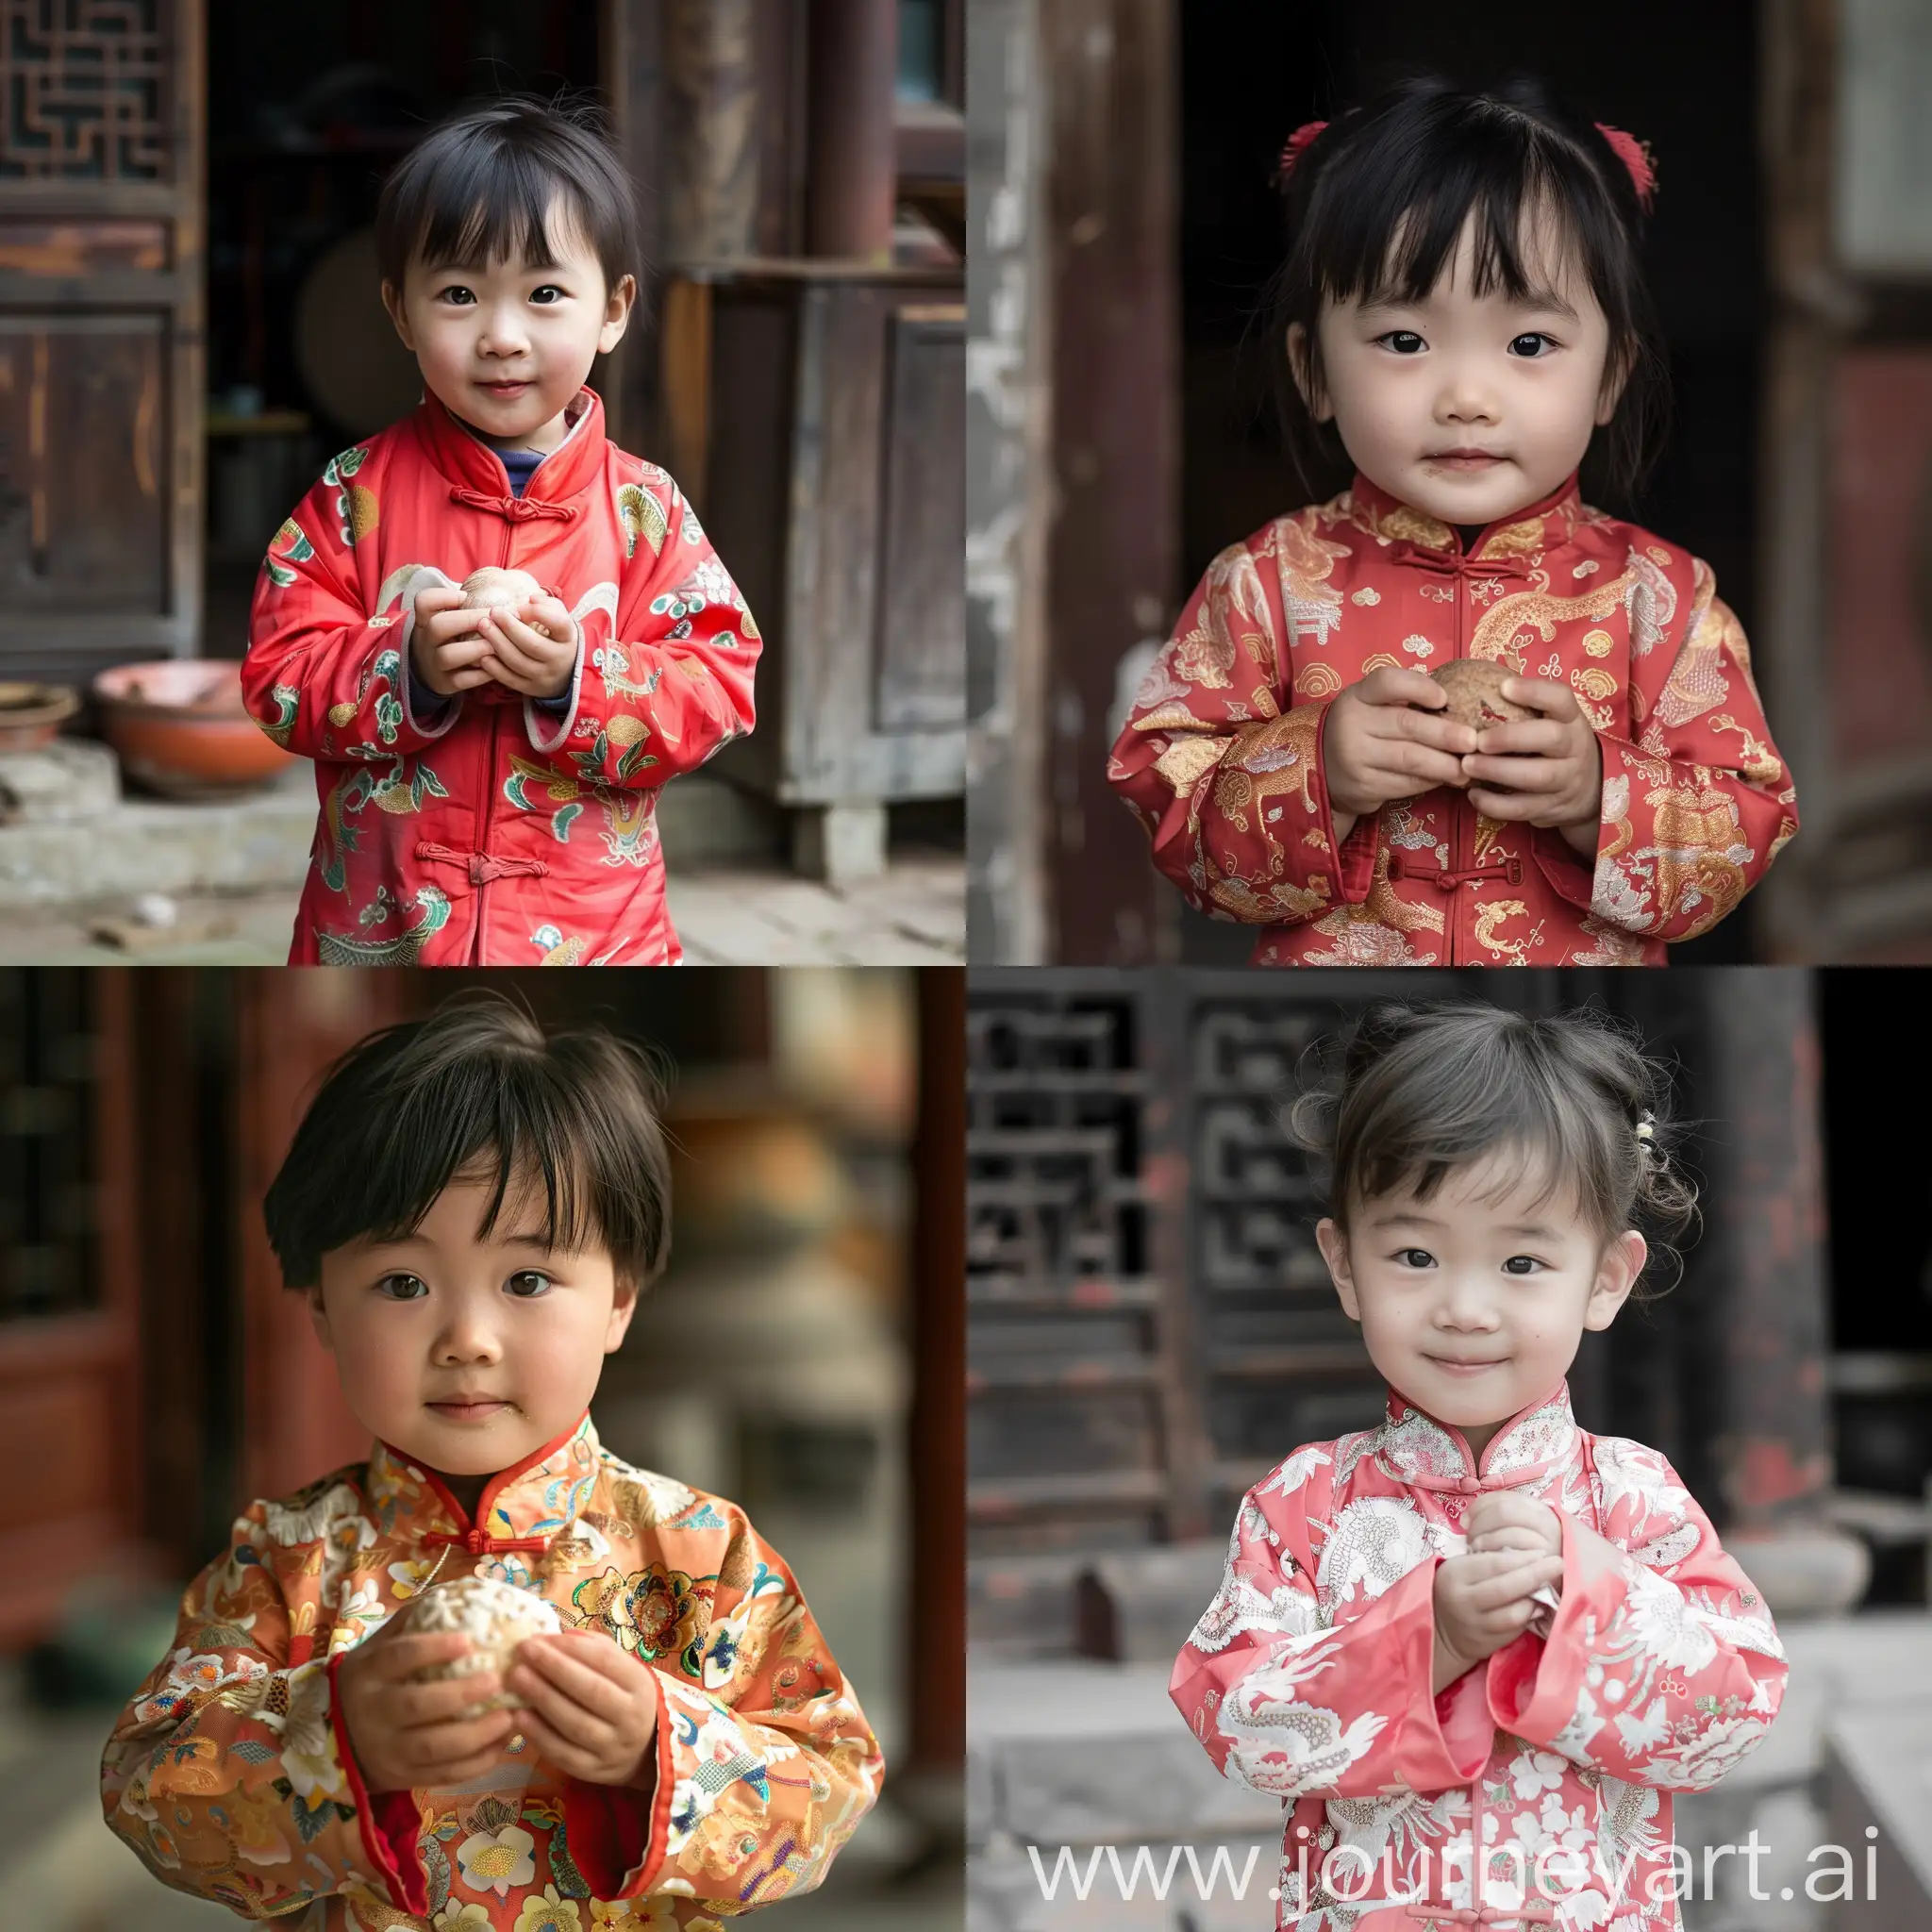 Chinese-Child-Holding-Object